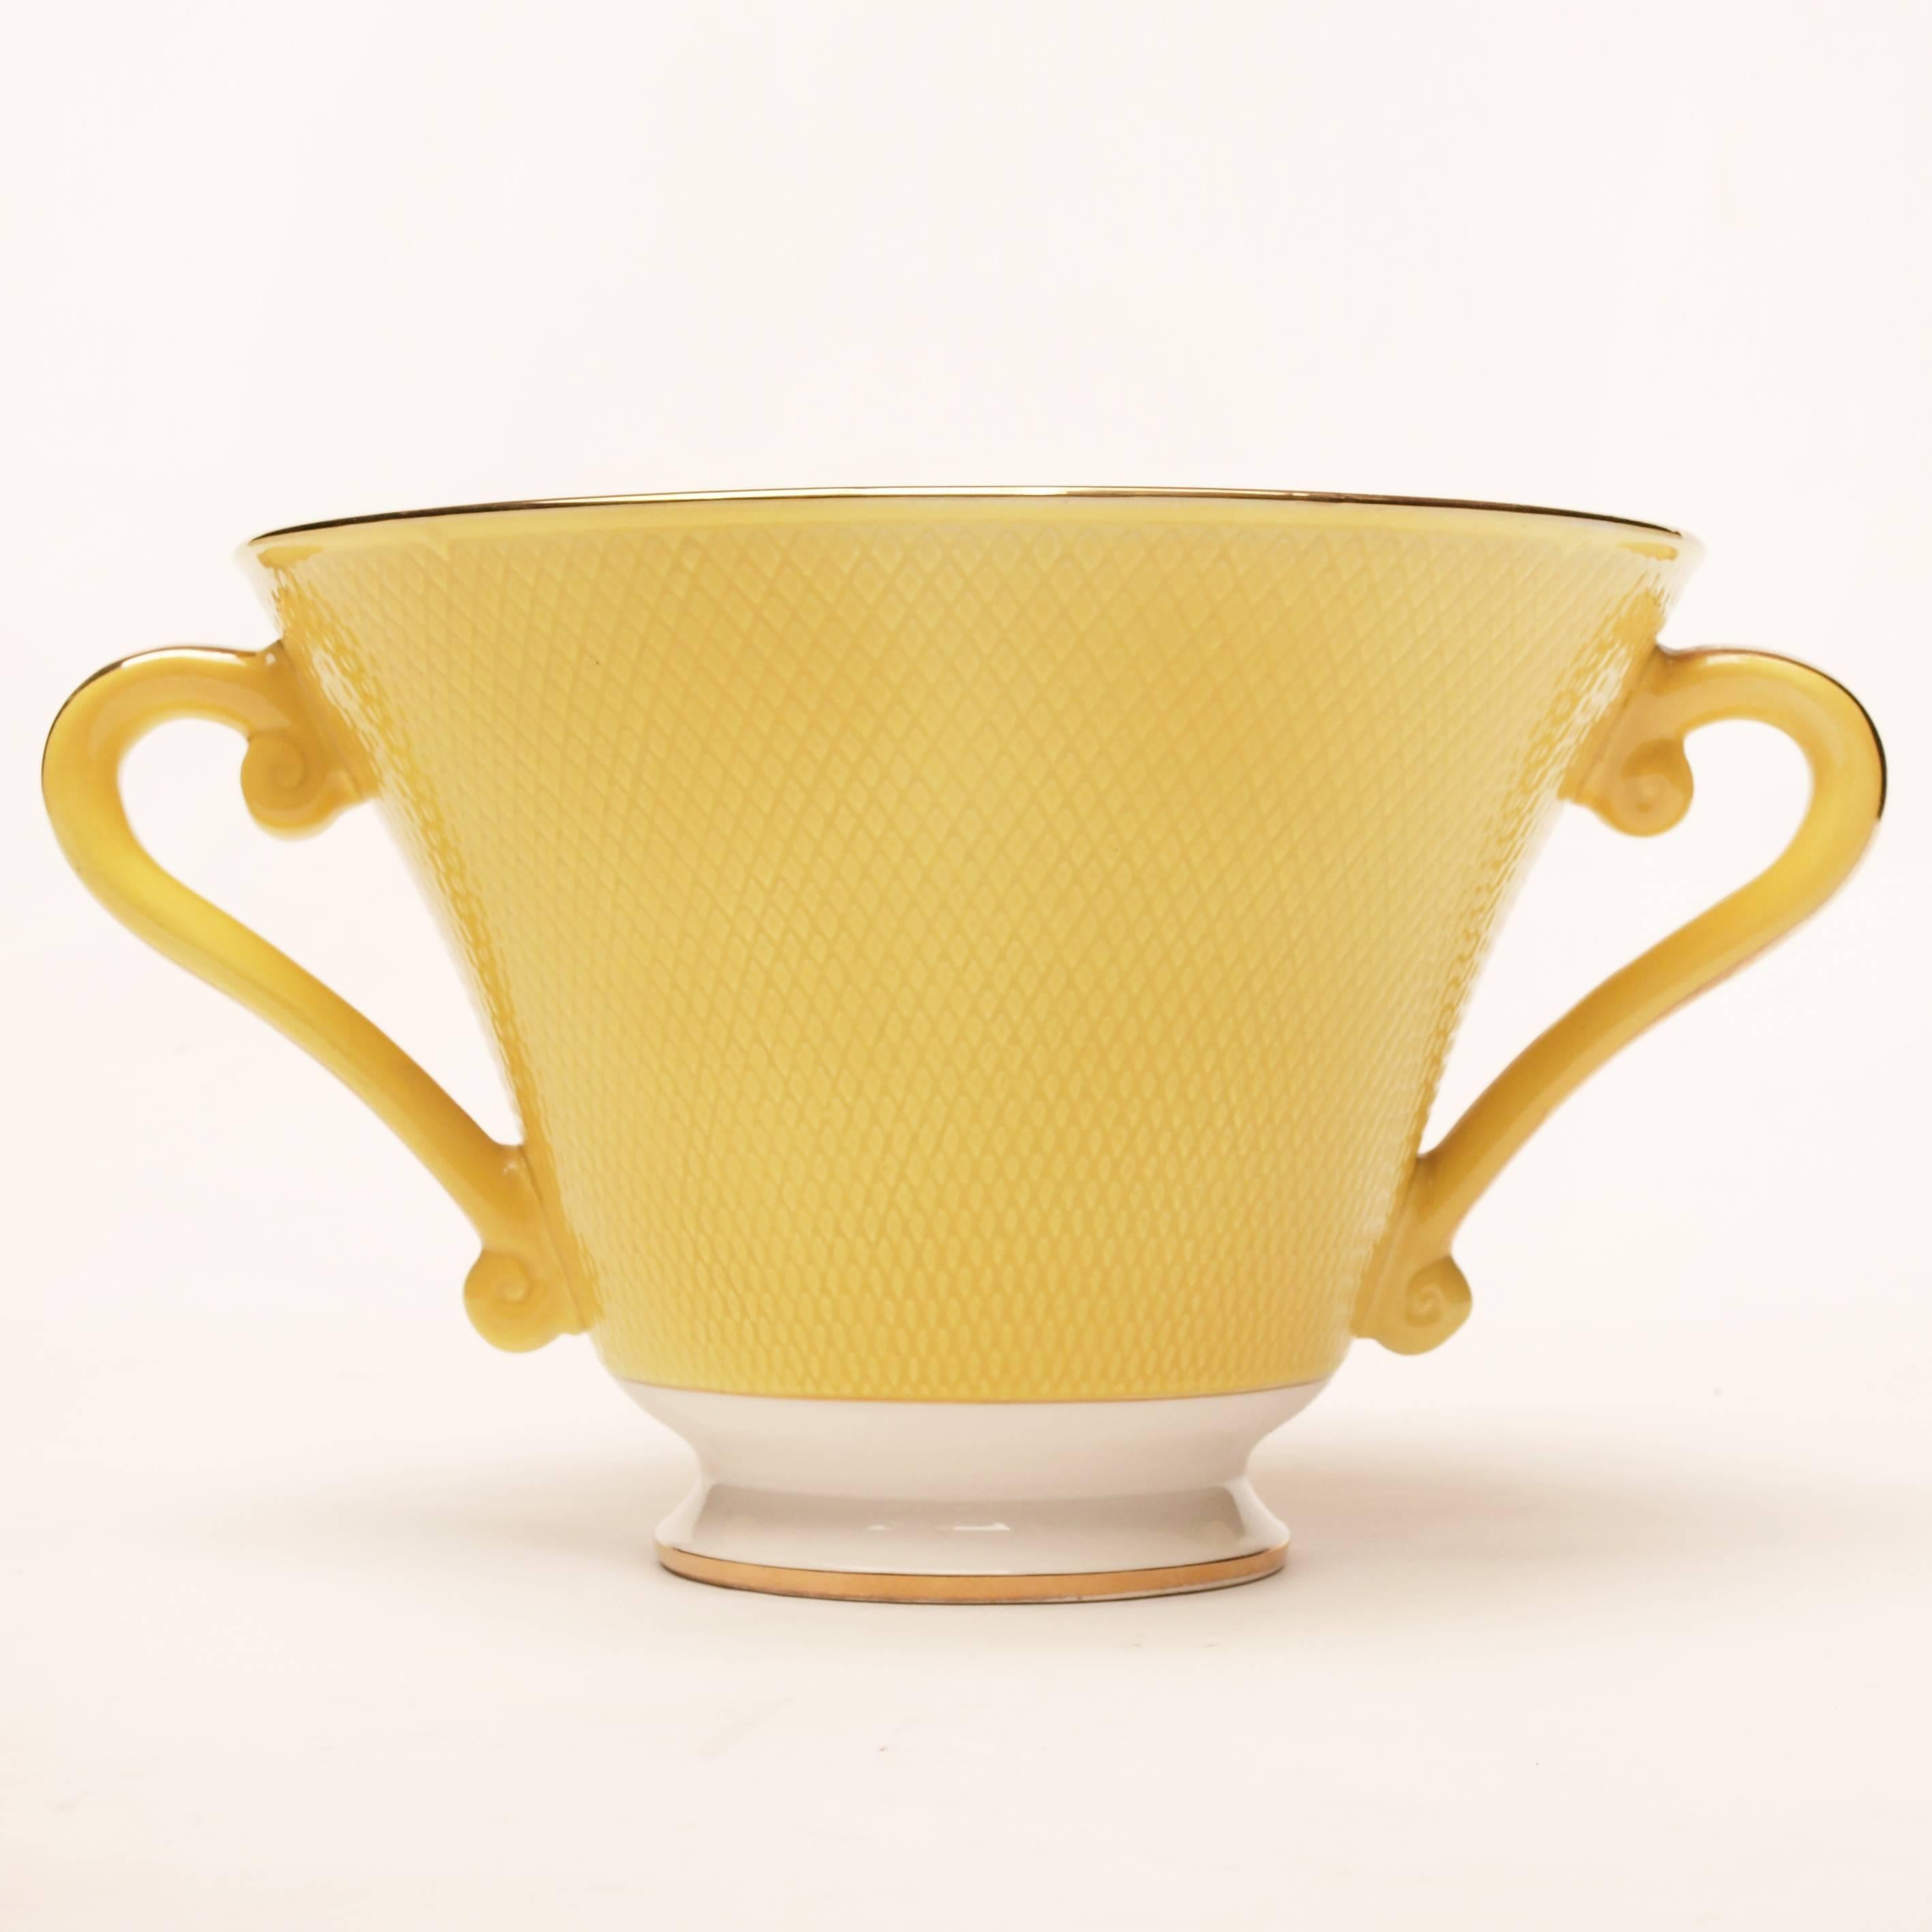 Glazed in lemon yellow and finished in gold trim This beautiful Salins centrepiece bowl has scrolled handles and traditional neoclassical proportions it’s slightly raised diamond pattern gives the appearance of turned enamel.
 